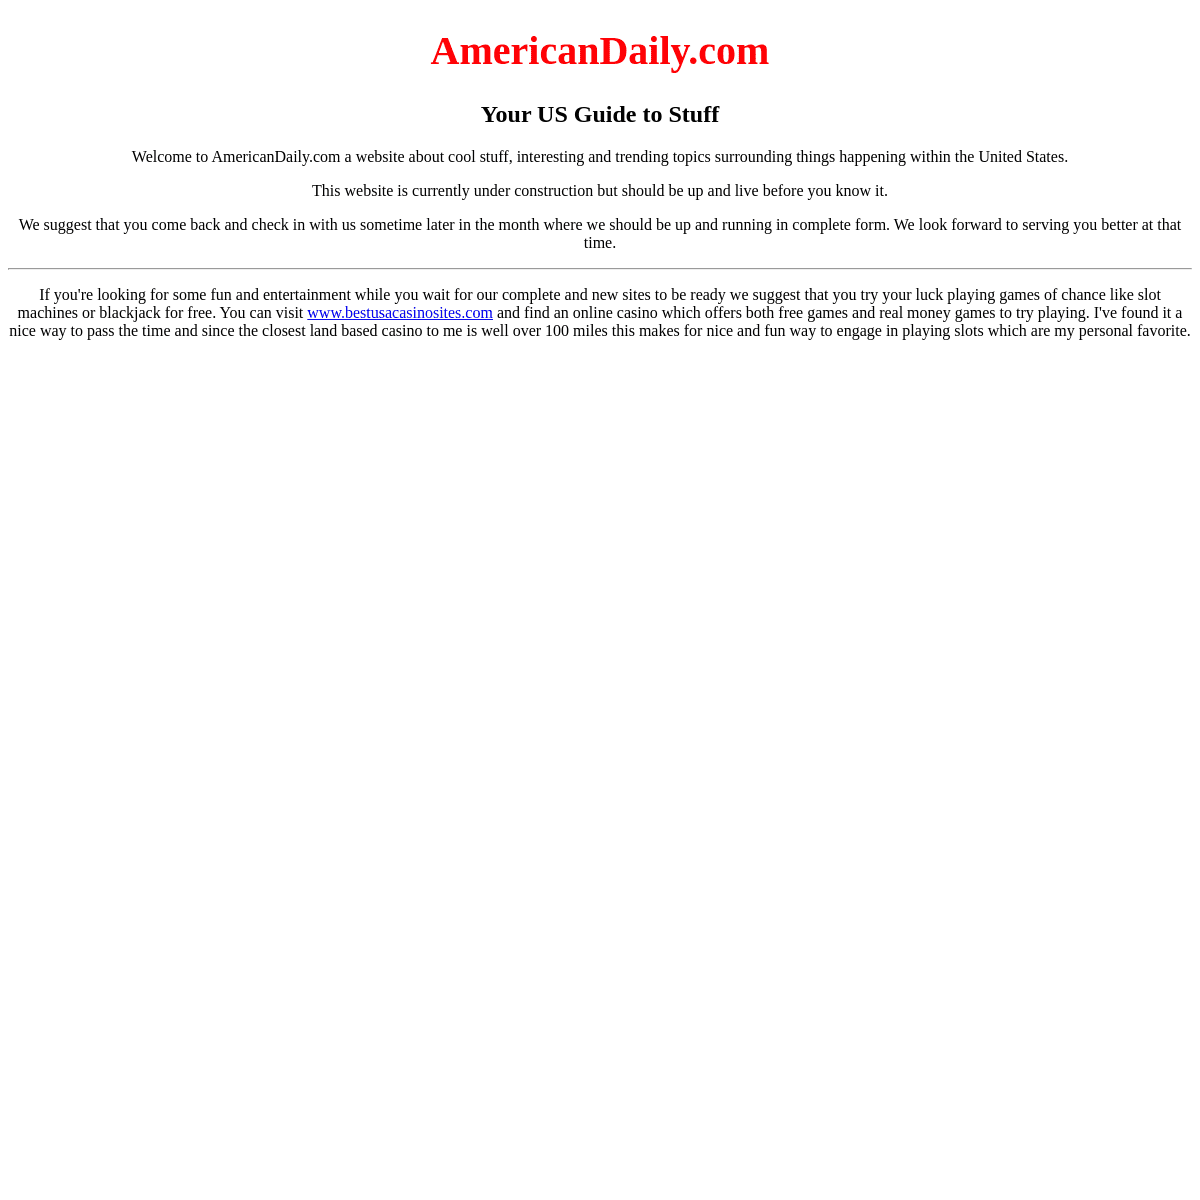 A complete backup of https://americandaily.com